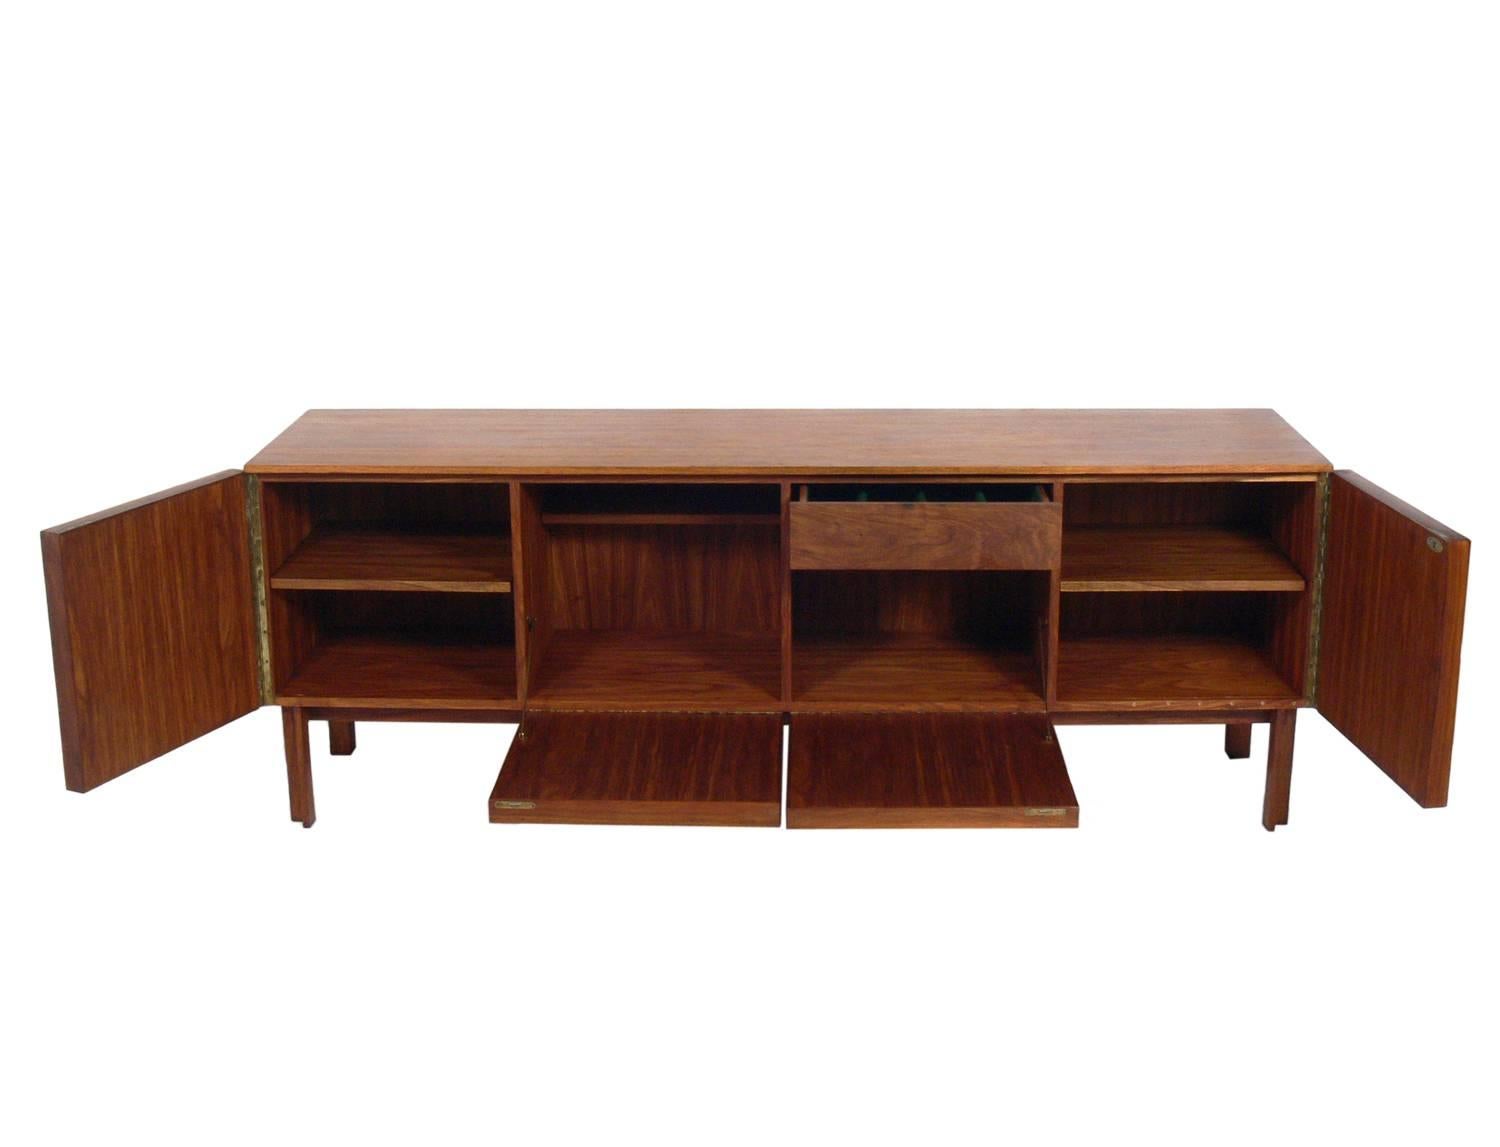 South African Clean Lined Midcentury Credenza by John Tabraham